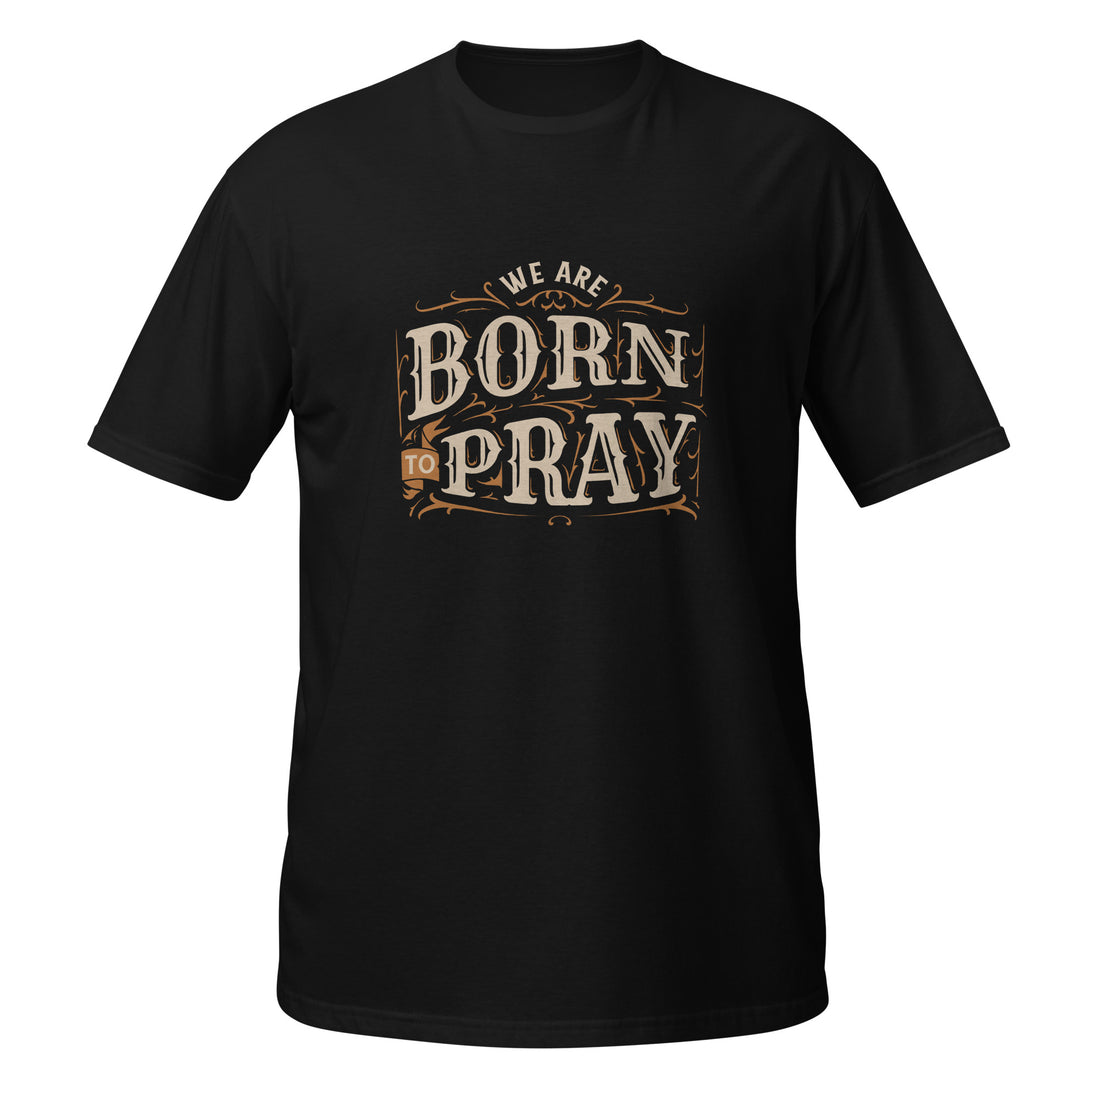 &quot;BORN TO PRAY&quot; T-Shirt Image: &quot;Born to Pray - Religious Short-Sleeve T-Shirt: Your Staple of Comfort and Faith.&quot;